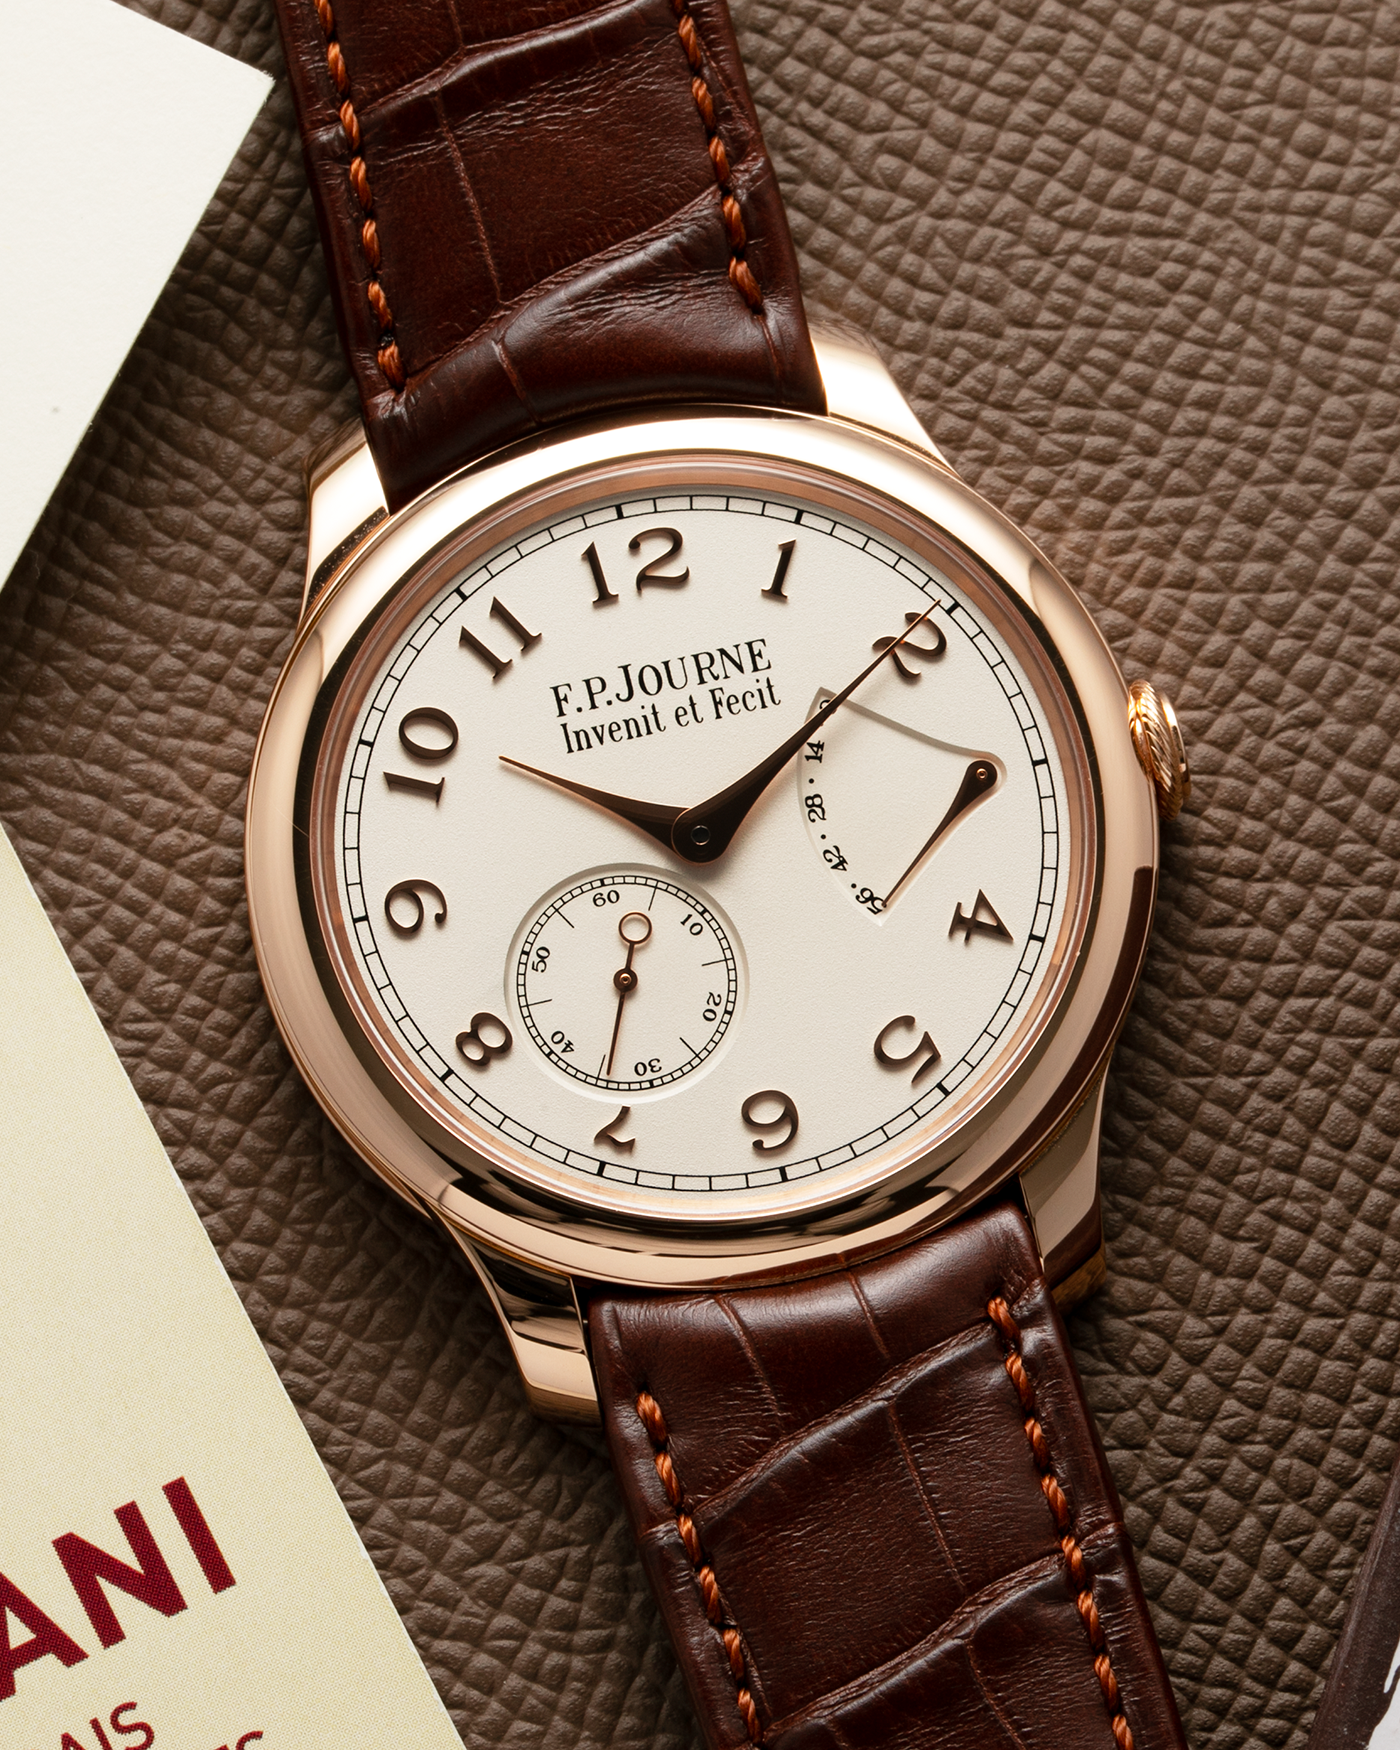 Brand: F.P. Journe Year: 2021 Model: Chronomètre Souverain Material: 18-carat Rose Gold Movement: F.P Journe Cal. 1304, Manual-Winding Case Diameter: 40mm Lug Width: 20mm Strap: F.P. Journe Brown Alligator Leather Strap and Signed 18-carat Rose Gold Tang Buckle